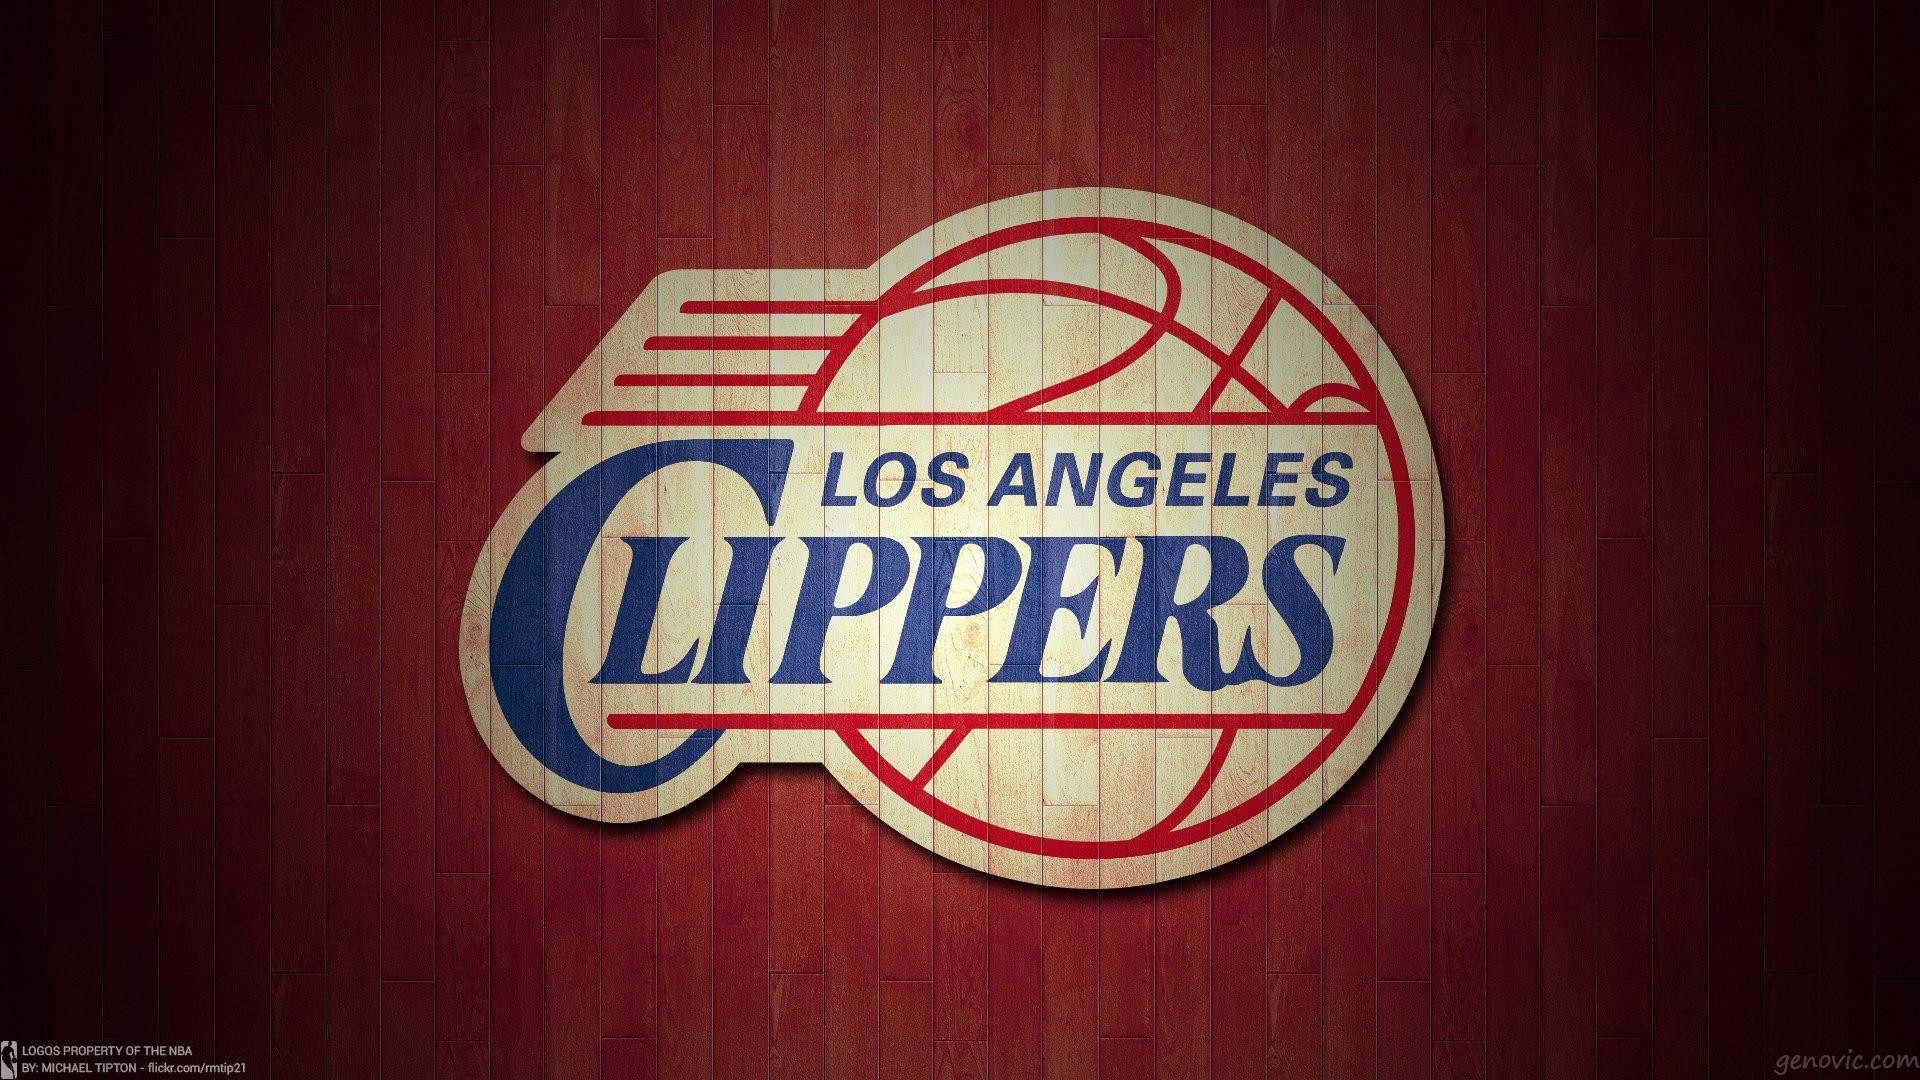 Los Angeles Clippers Wallpaper Image